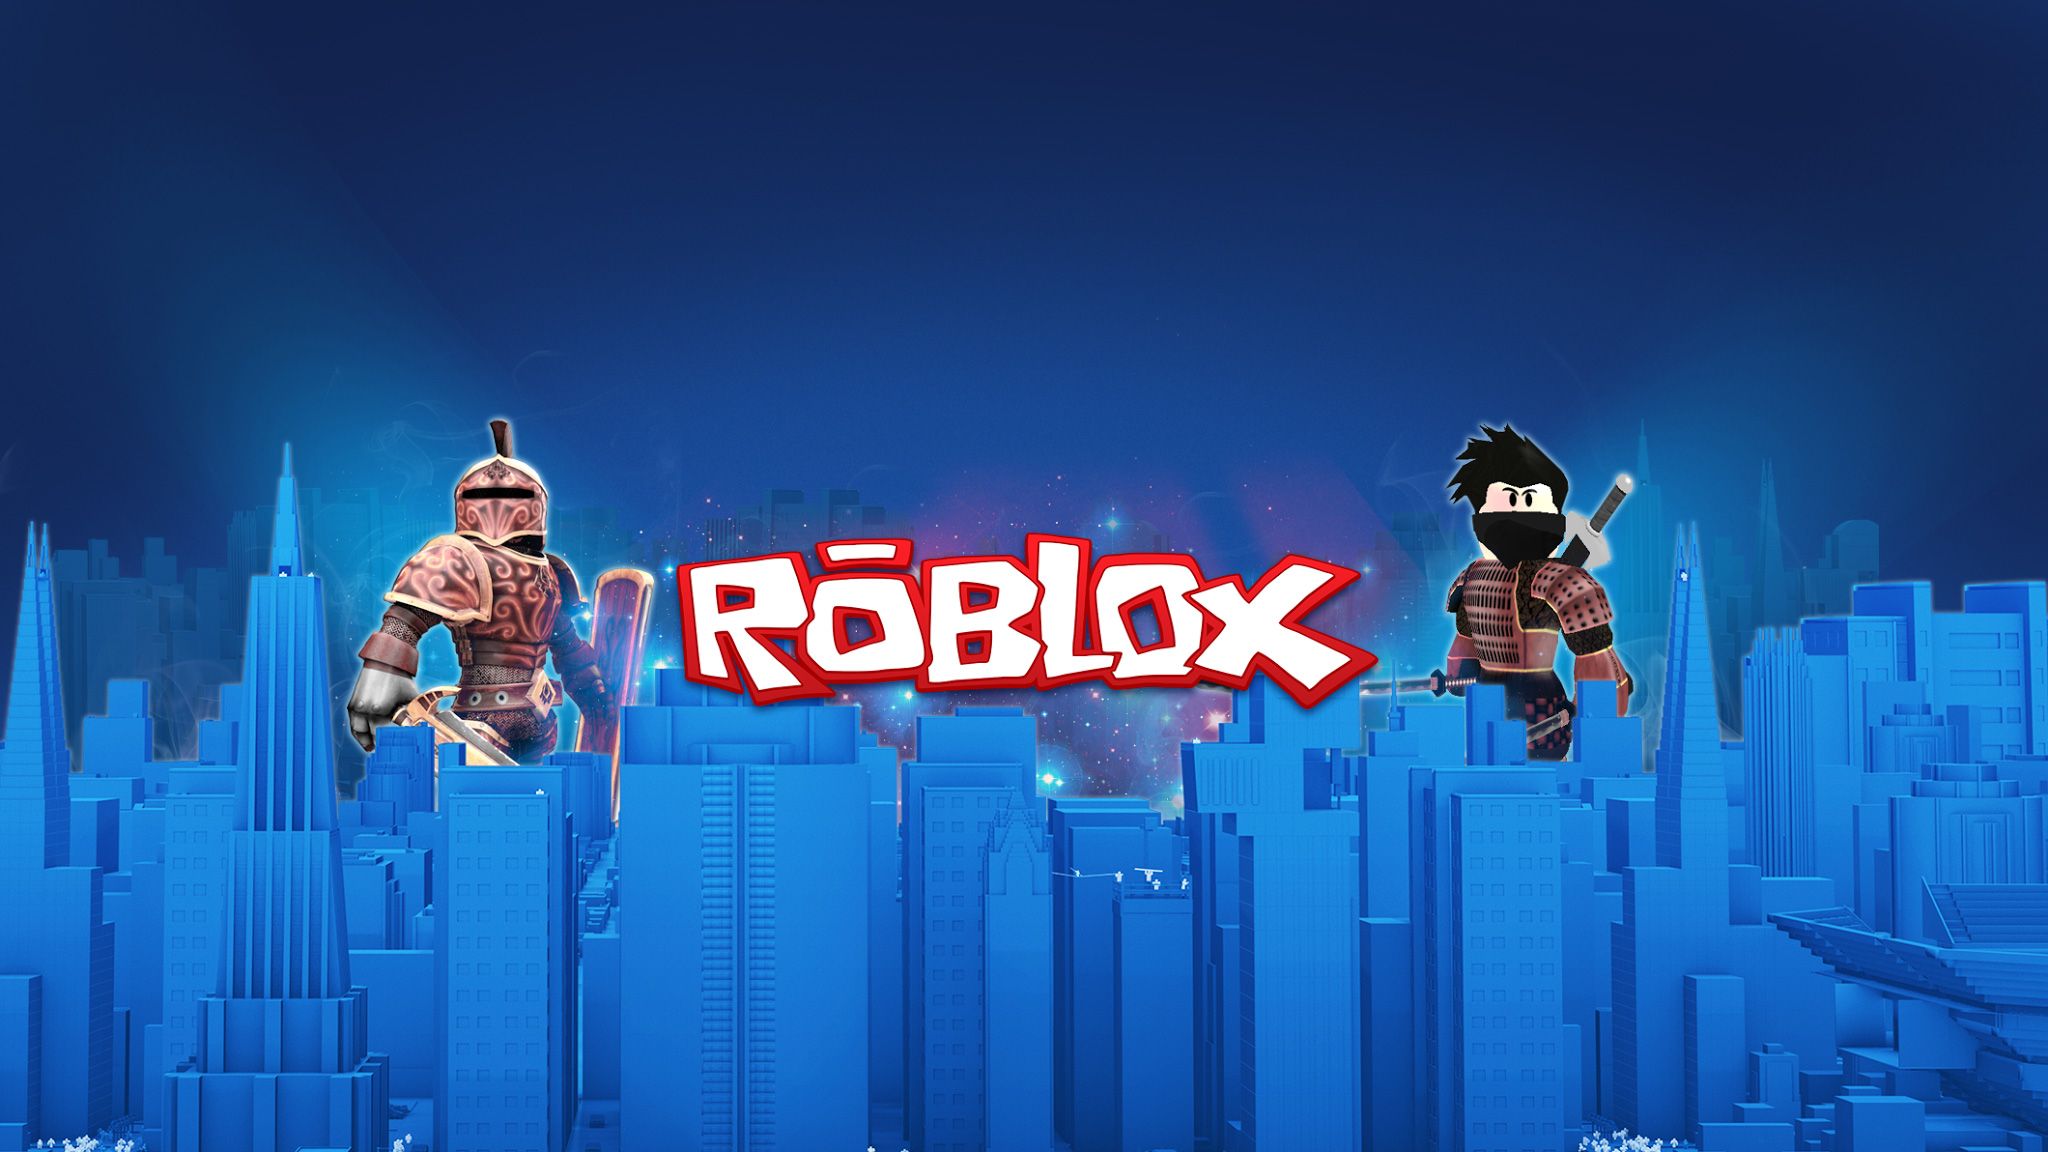 TC builds on X: Another simple wallpaper for roblox players #robloxart # Roblox #wallpaper  / X